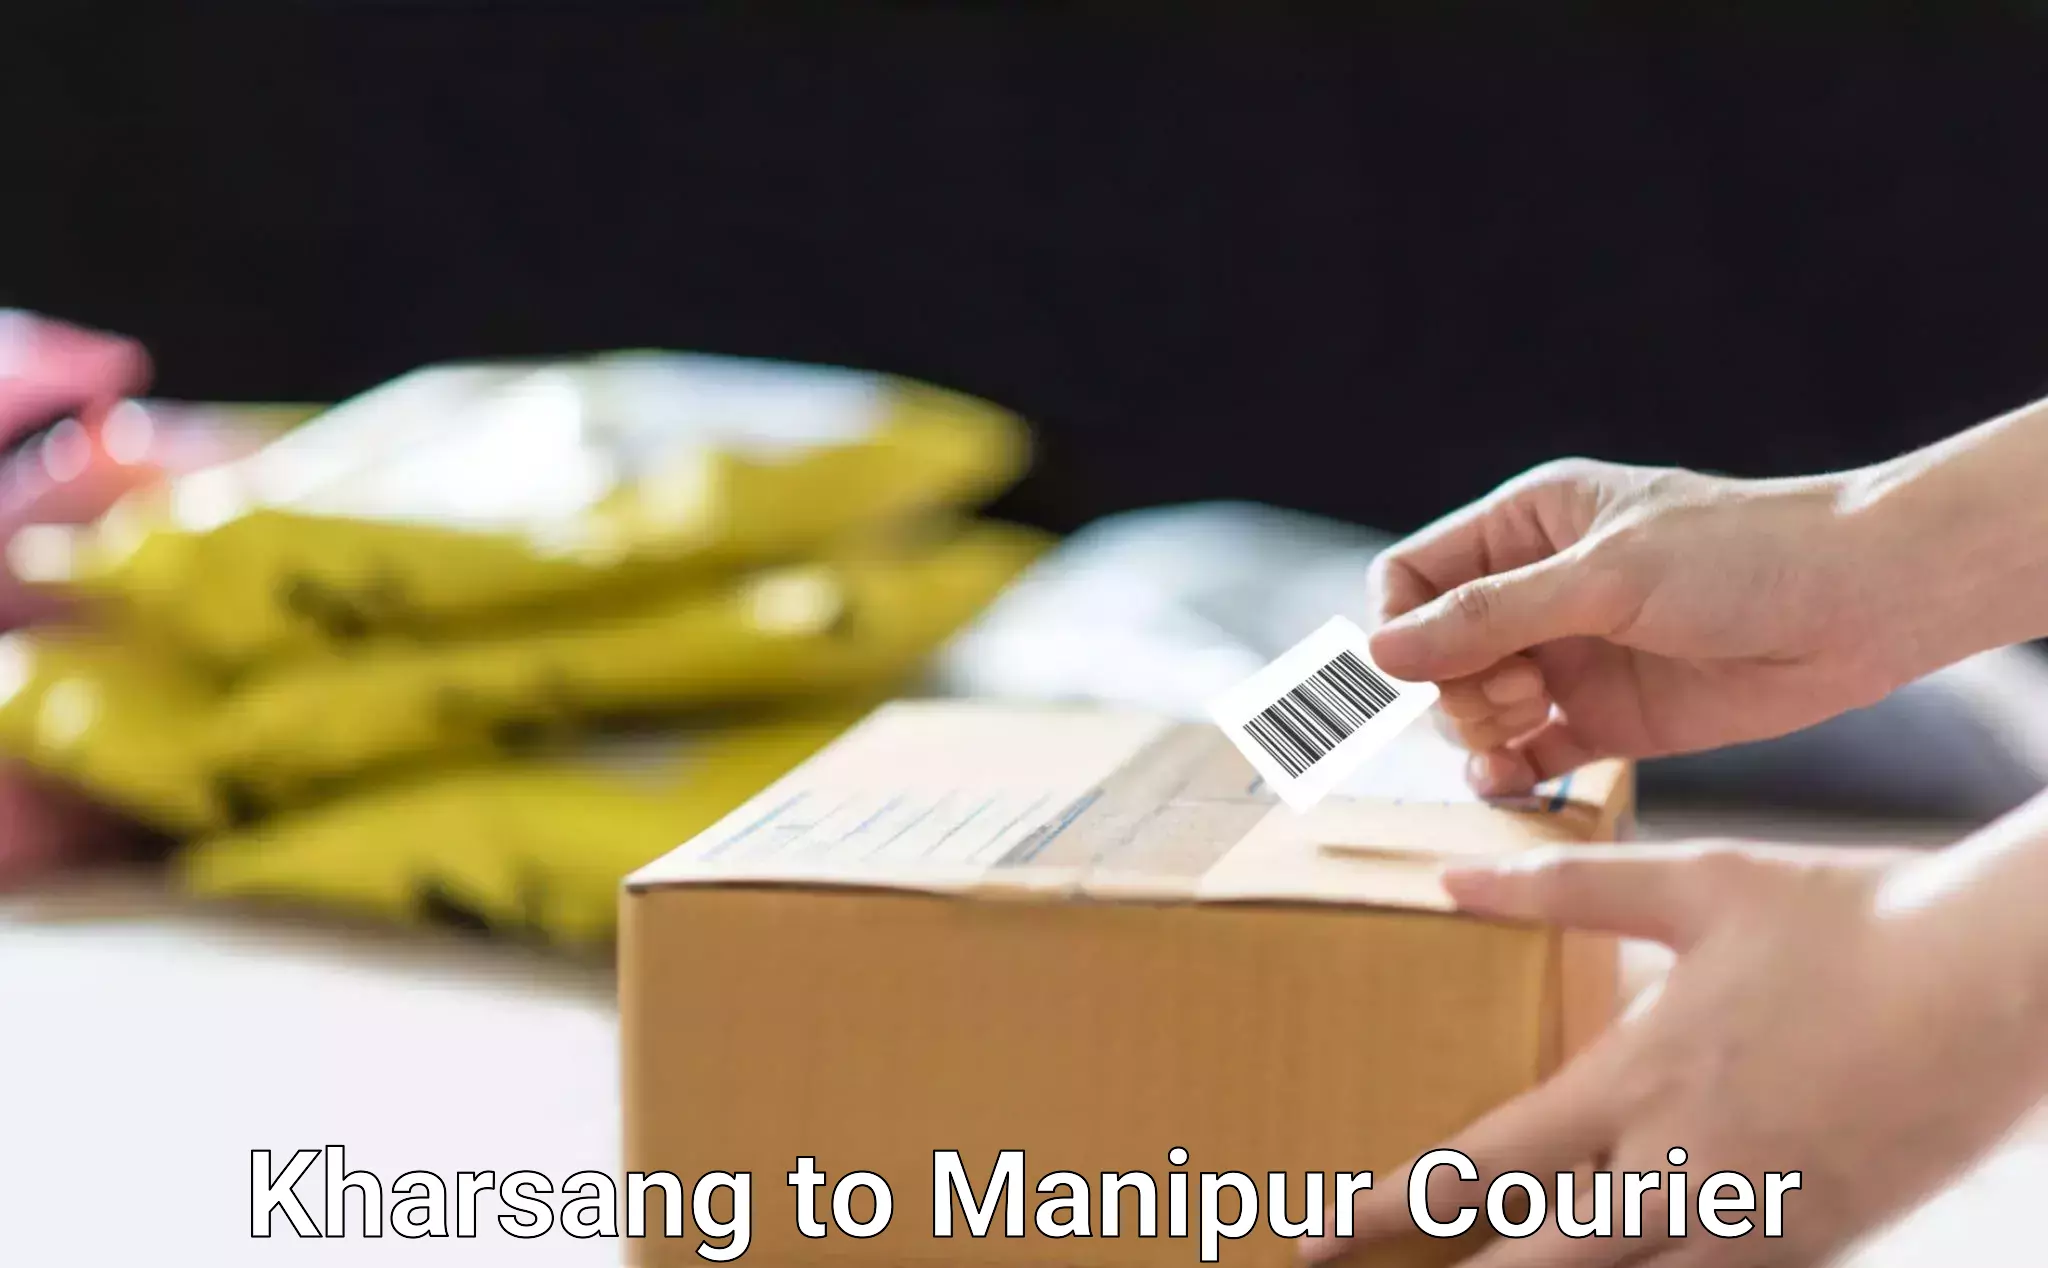 Global courier networks Kharsang to Manipur